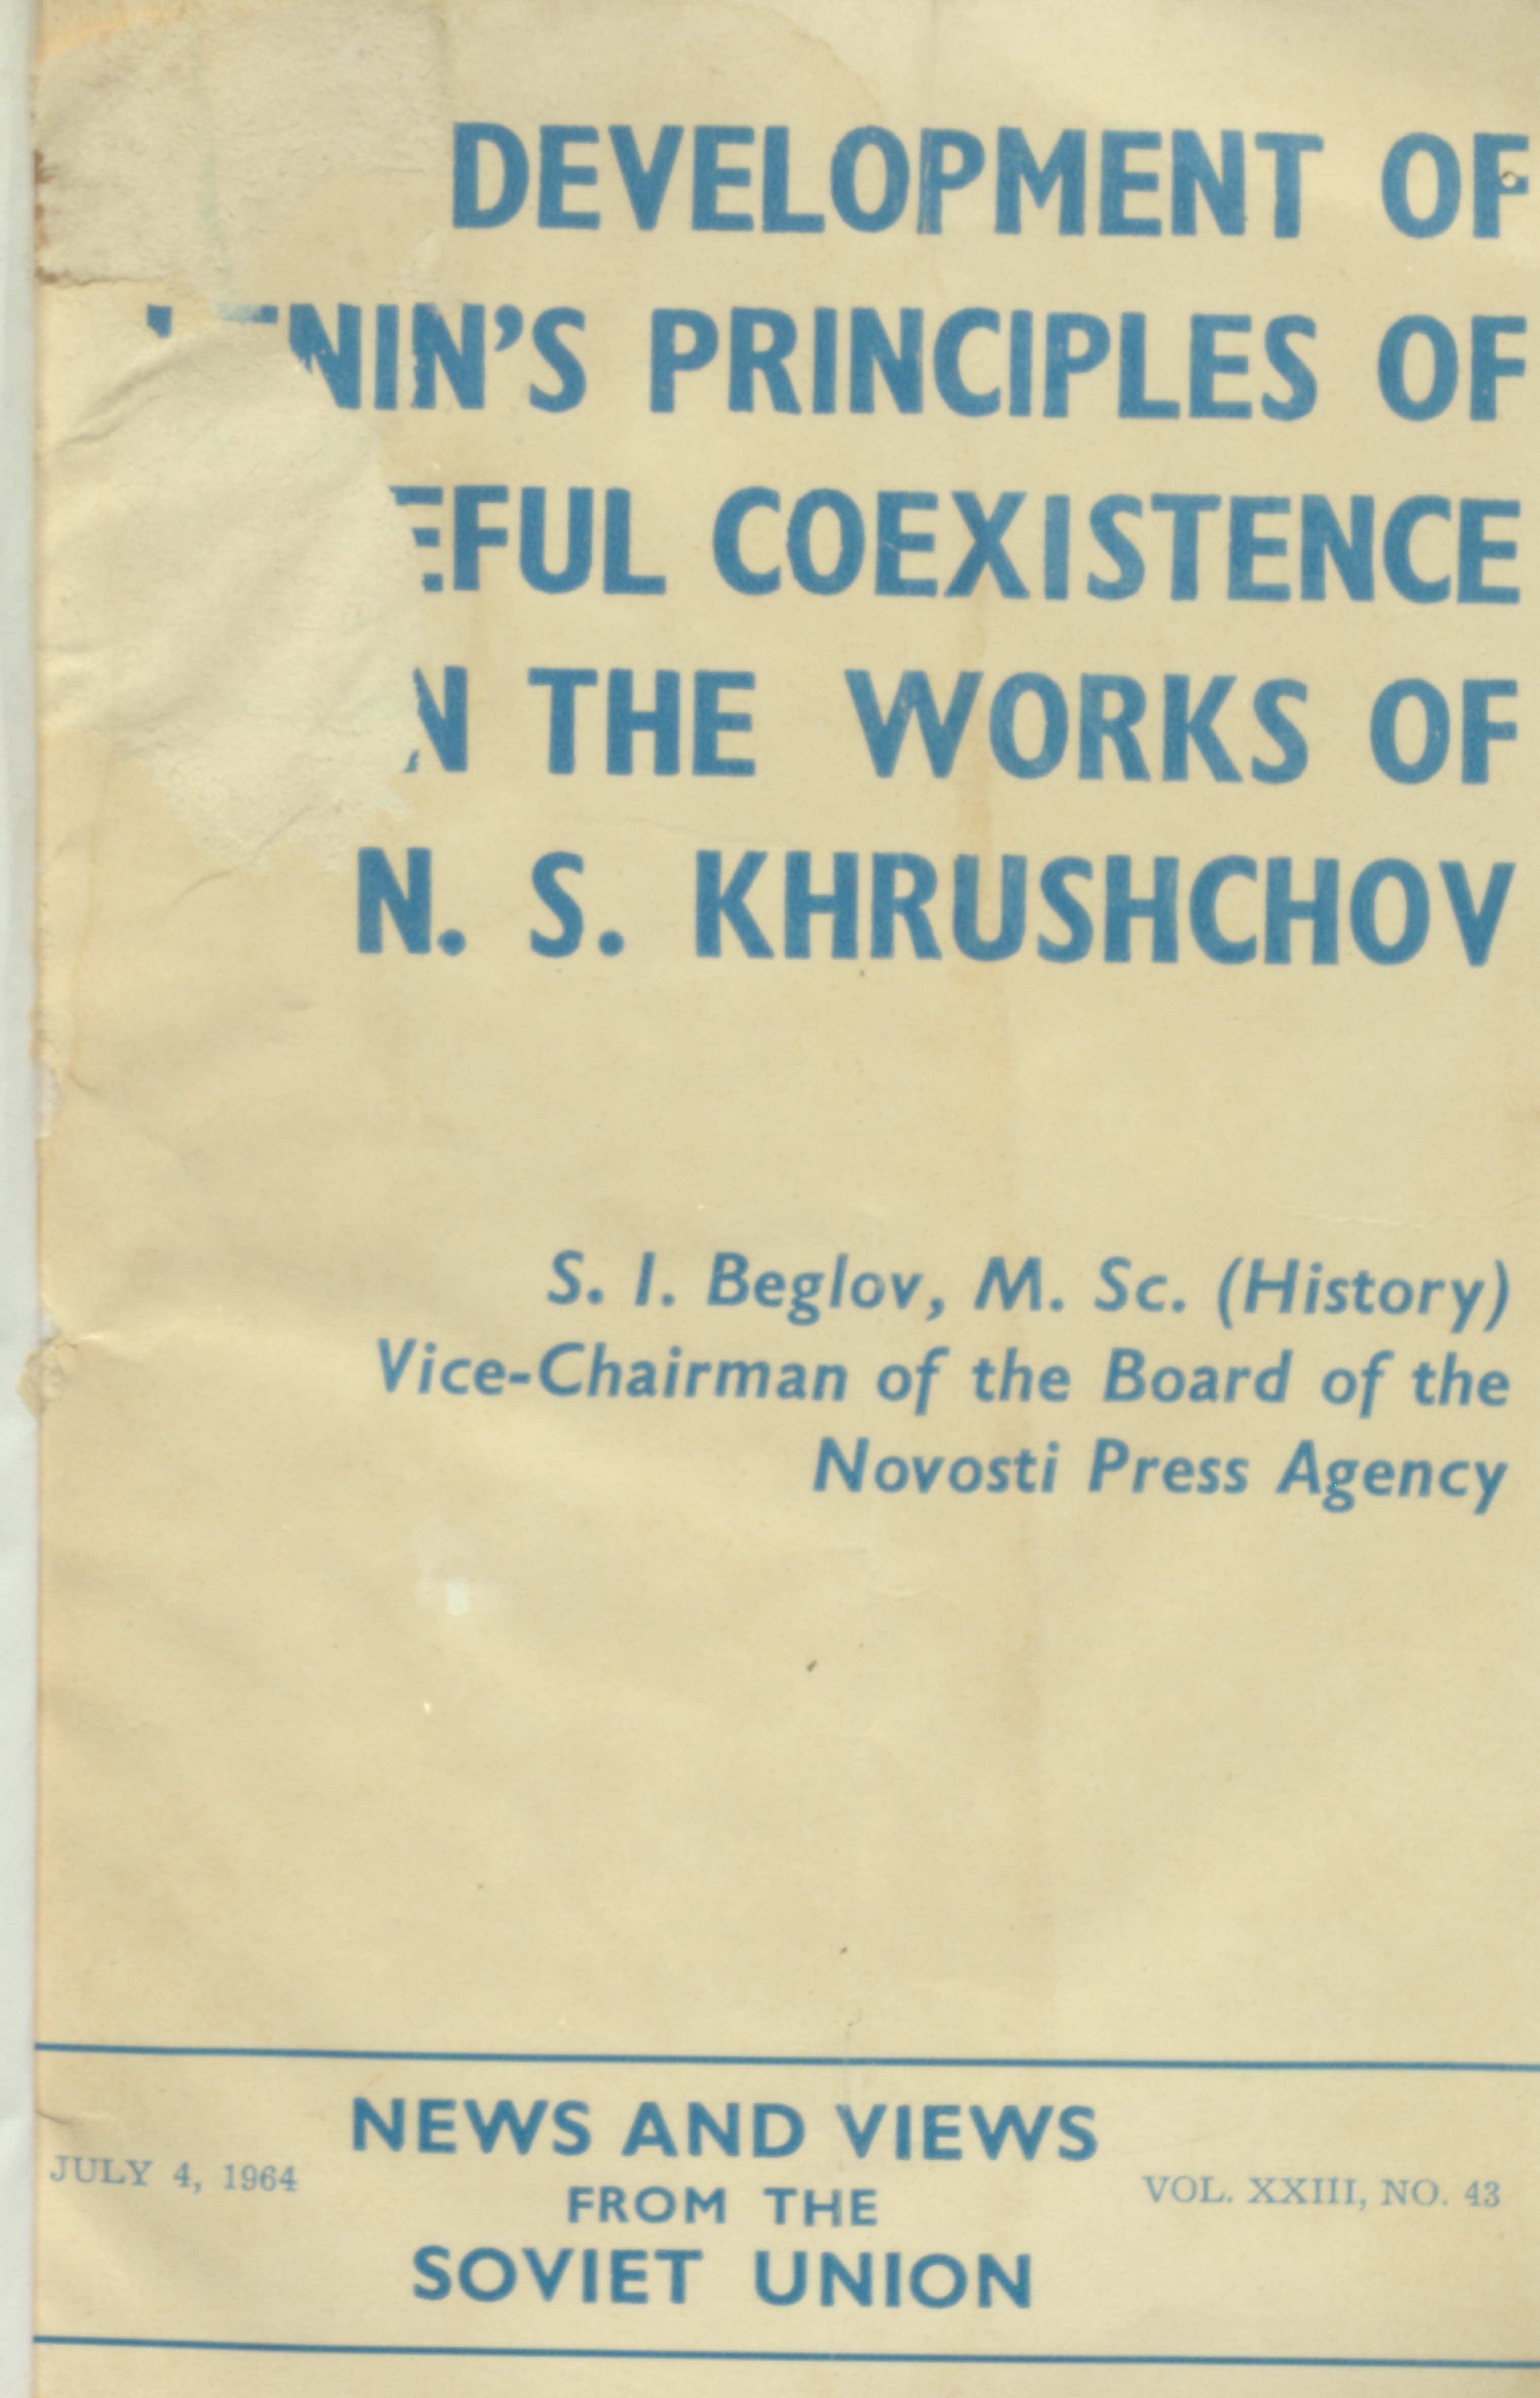 Development Of Lenins Principles Of Peaceful Coexistence onthe workes of N.s .Khrushchov